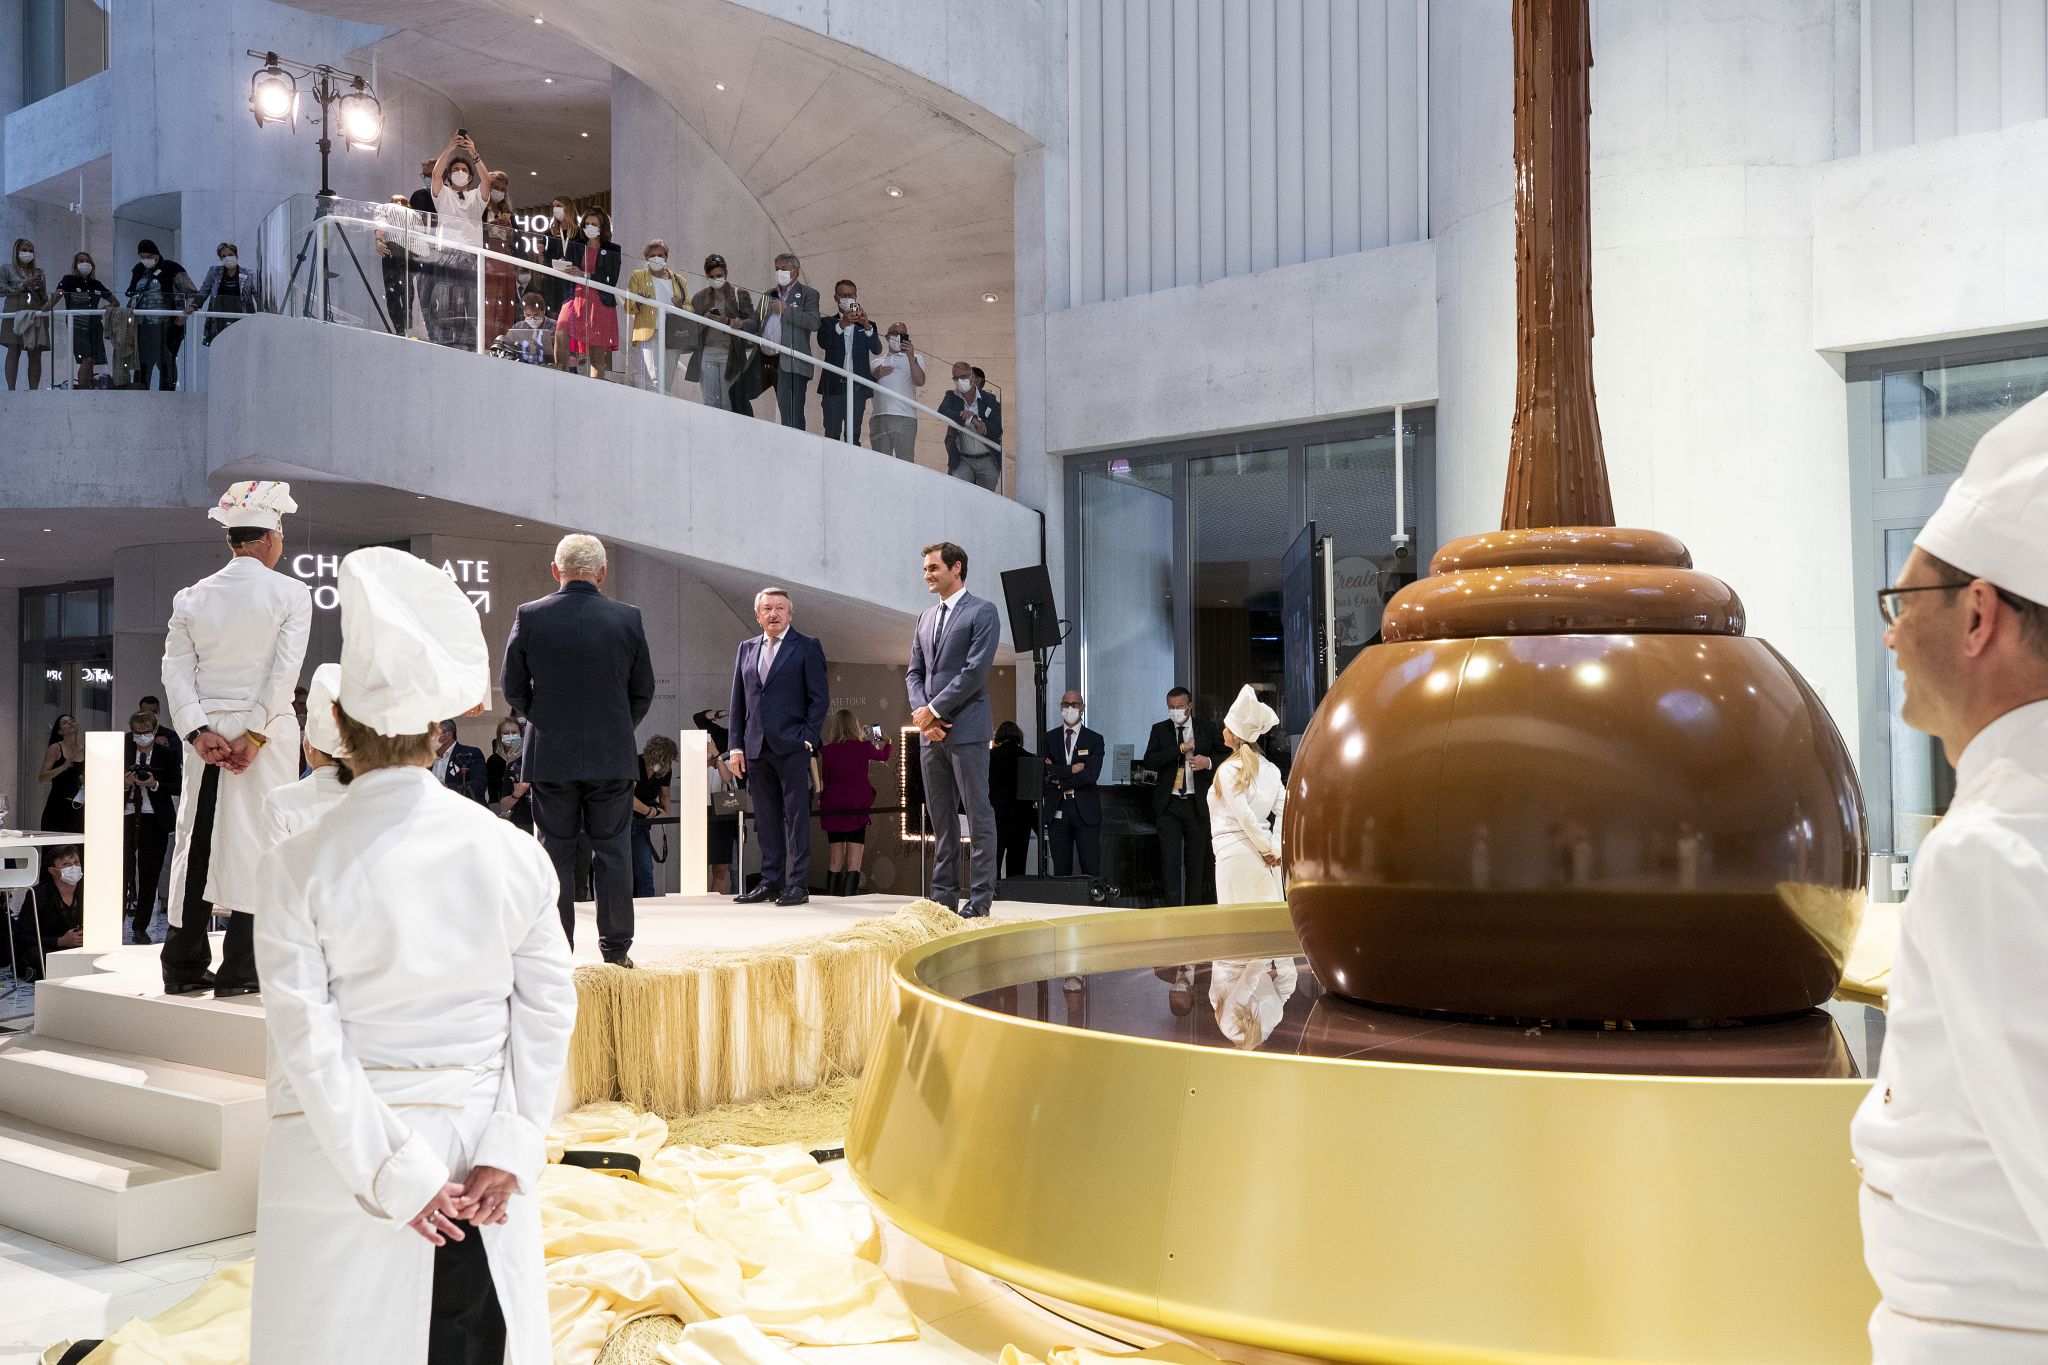 Lindt master chocolatier opens world's largest chocolate museum and